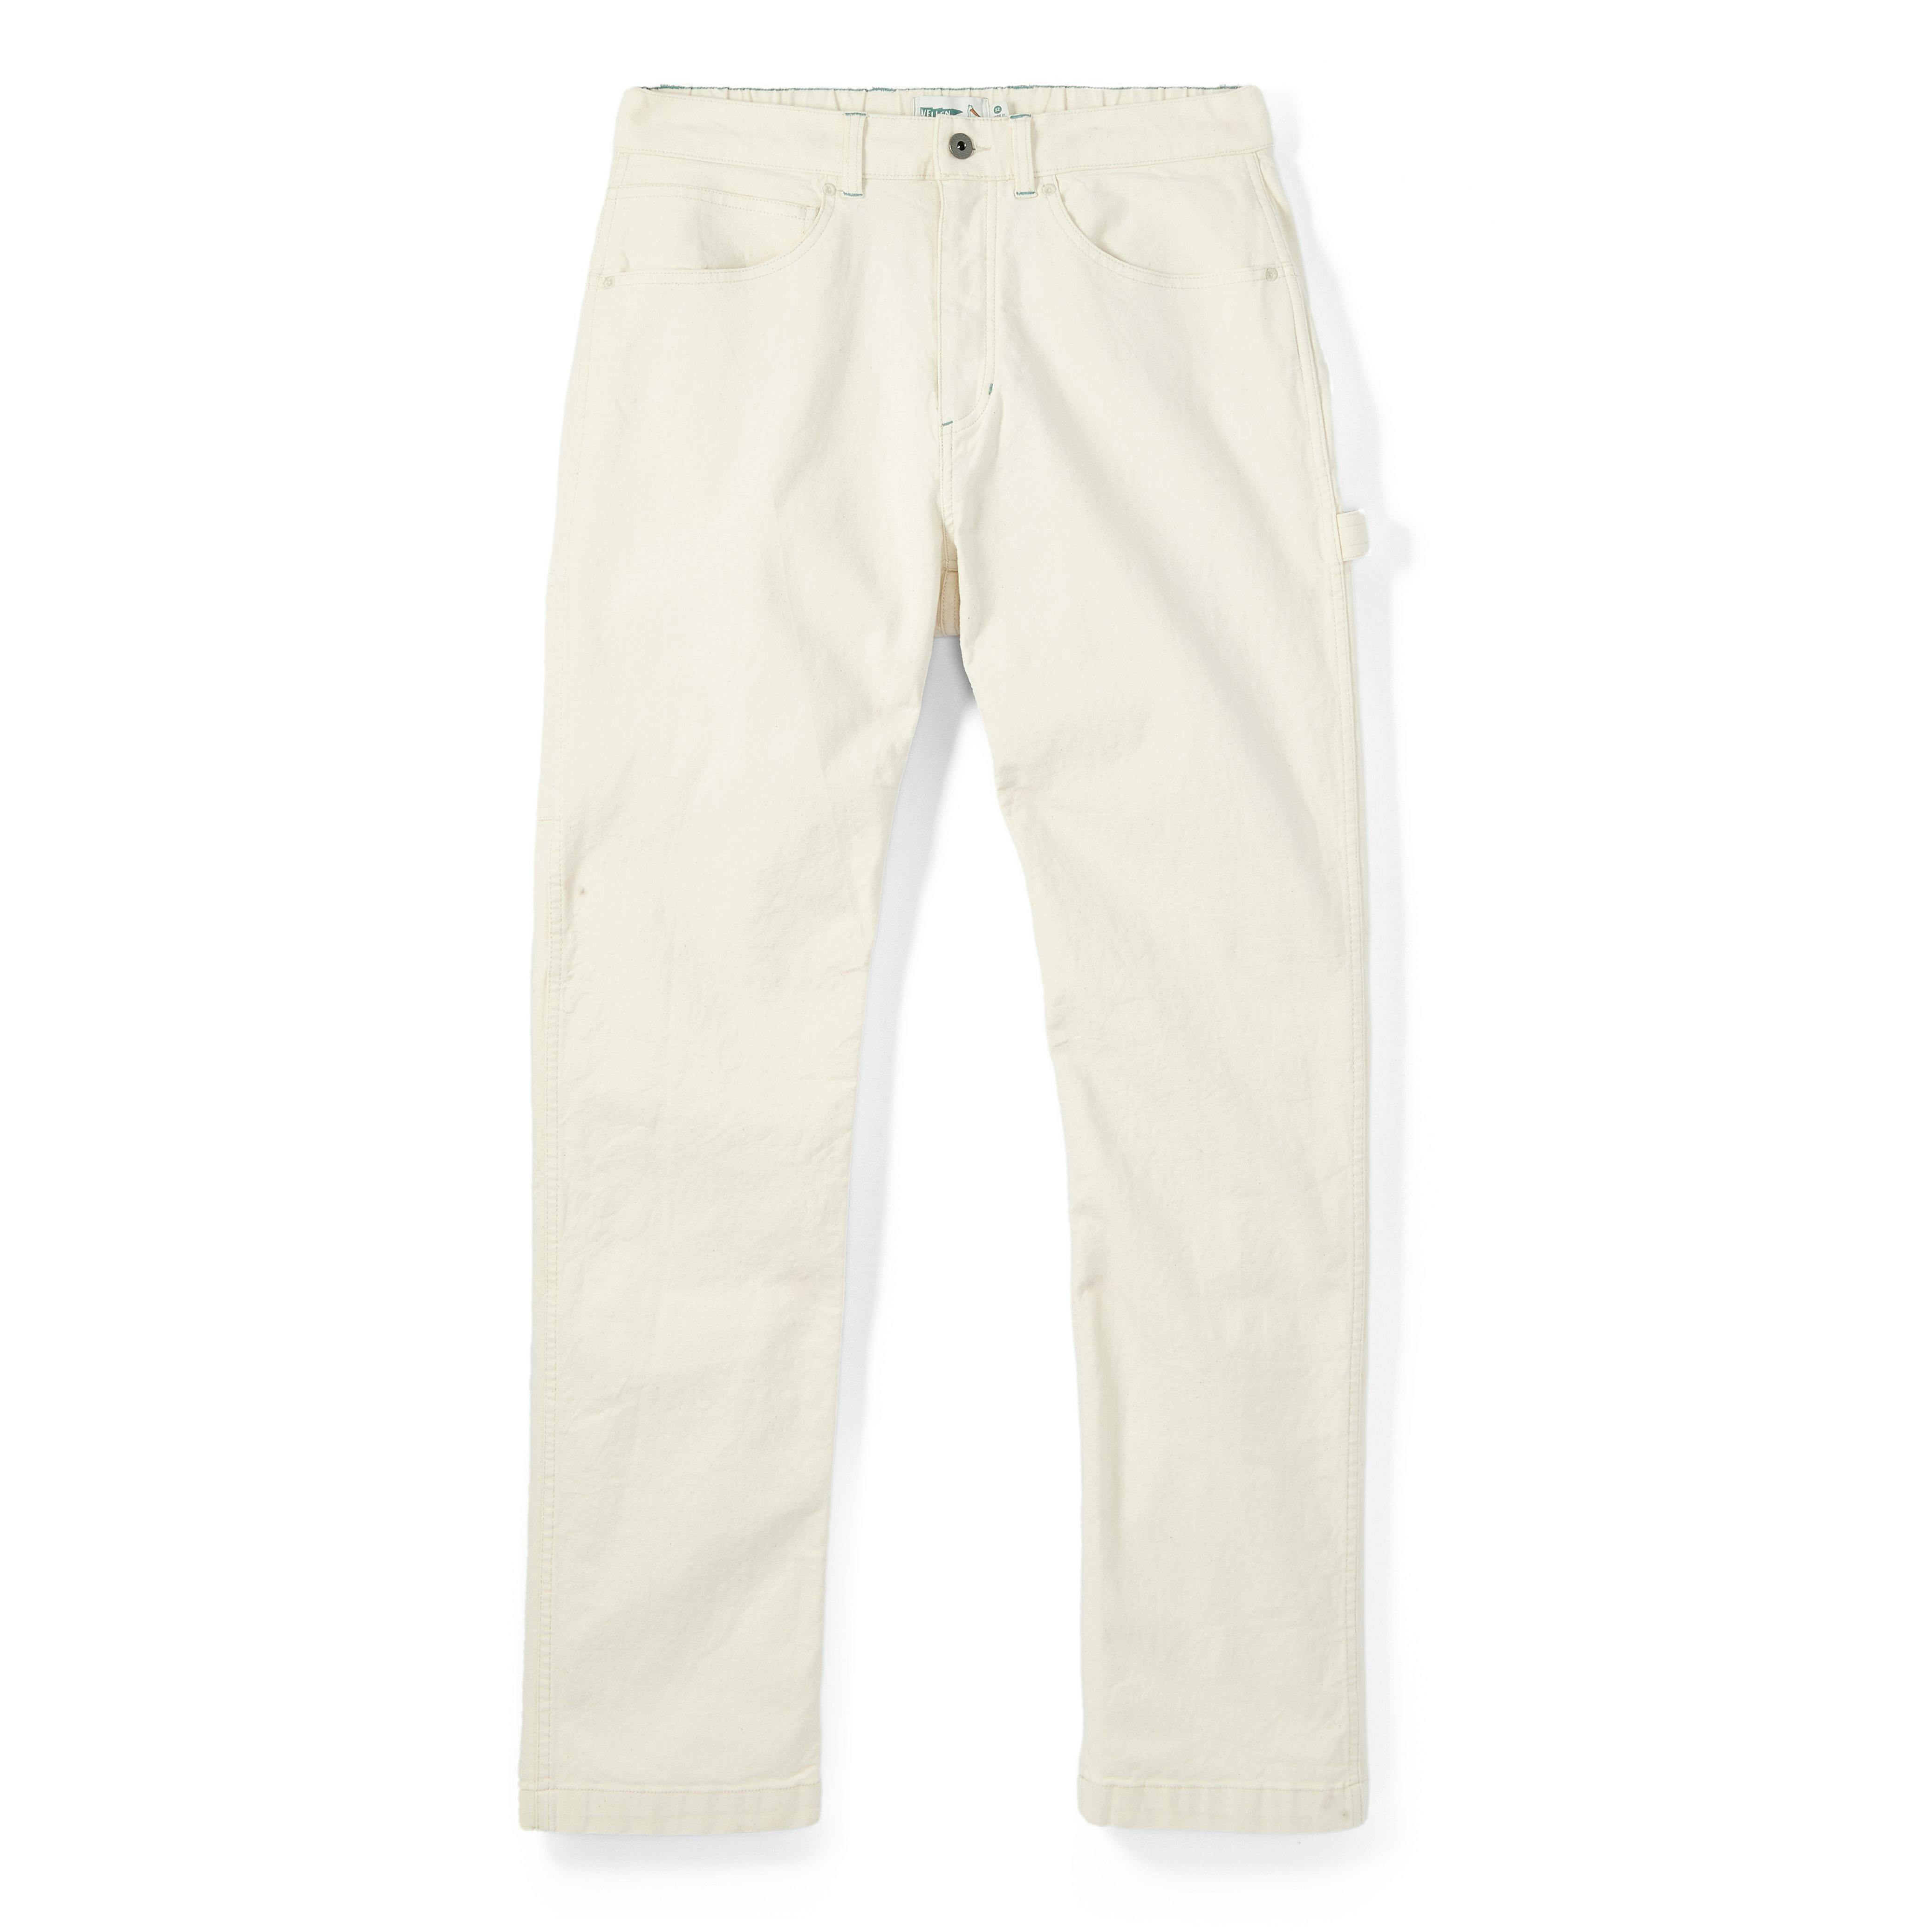 The Maker’s Stretch Work Pant